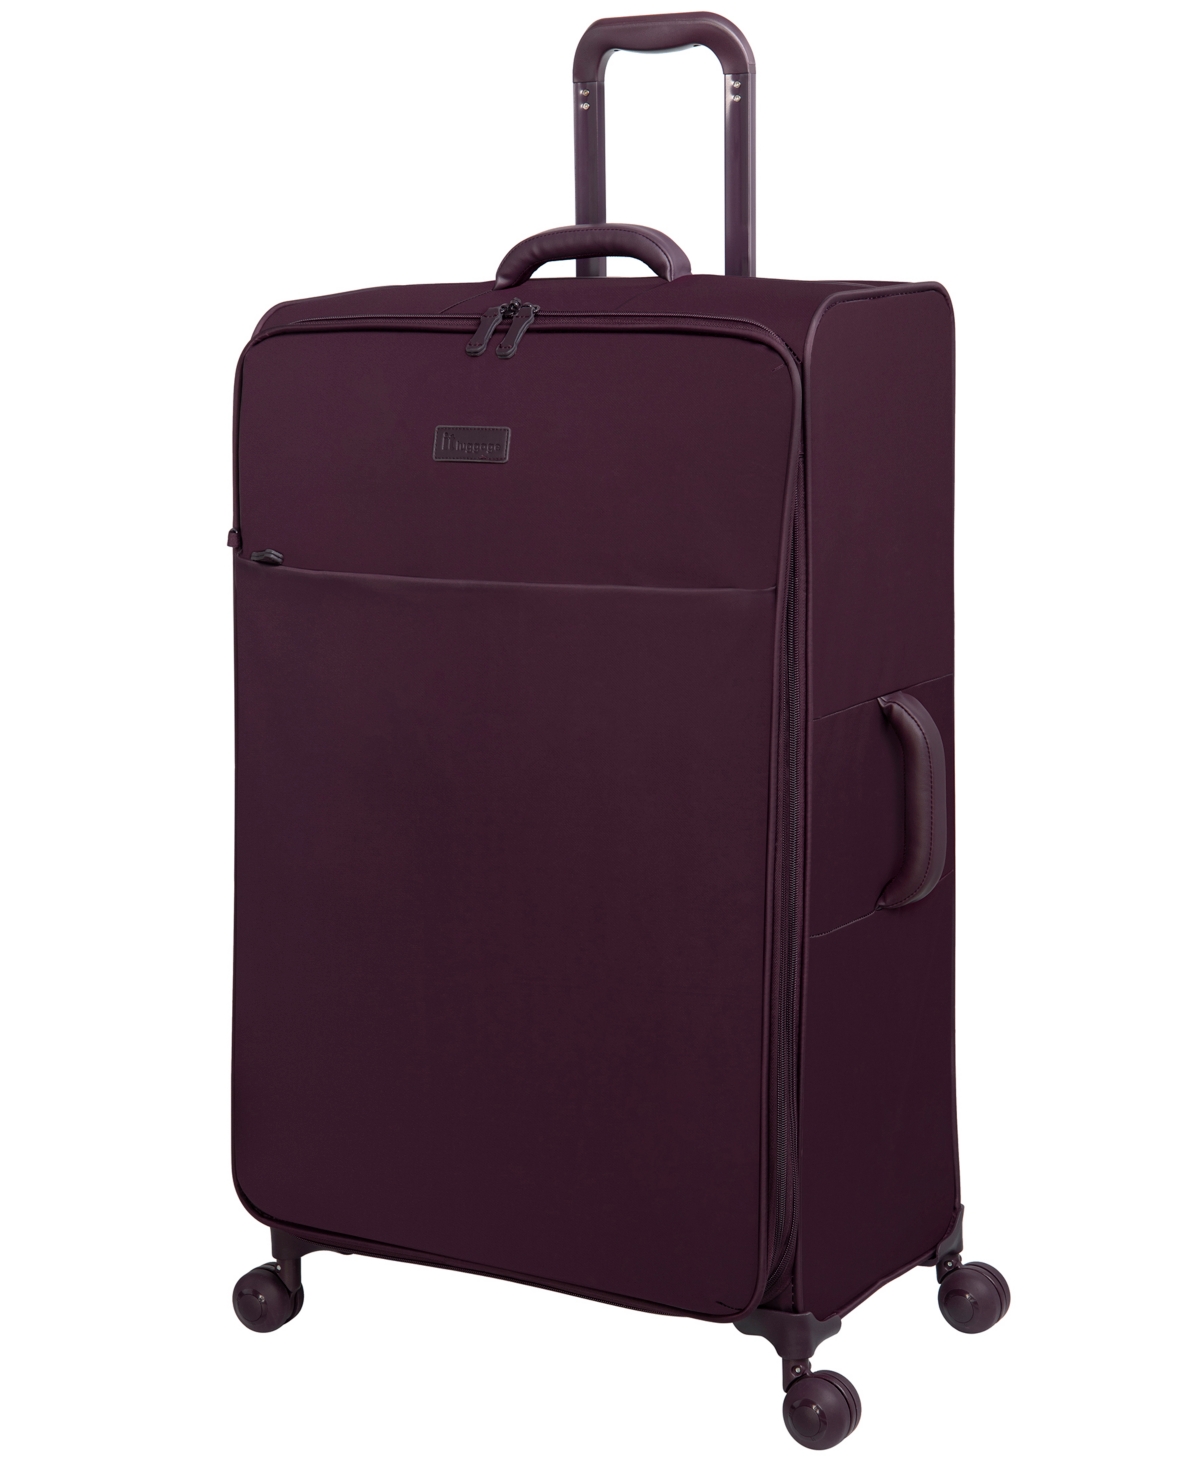 IT LUGGAGE LUSTROUS 29" SOFTSIDE CHECKED 8-WHEEL SPINNER